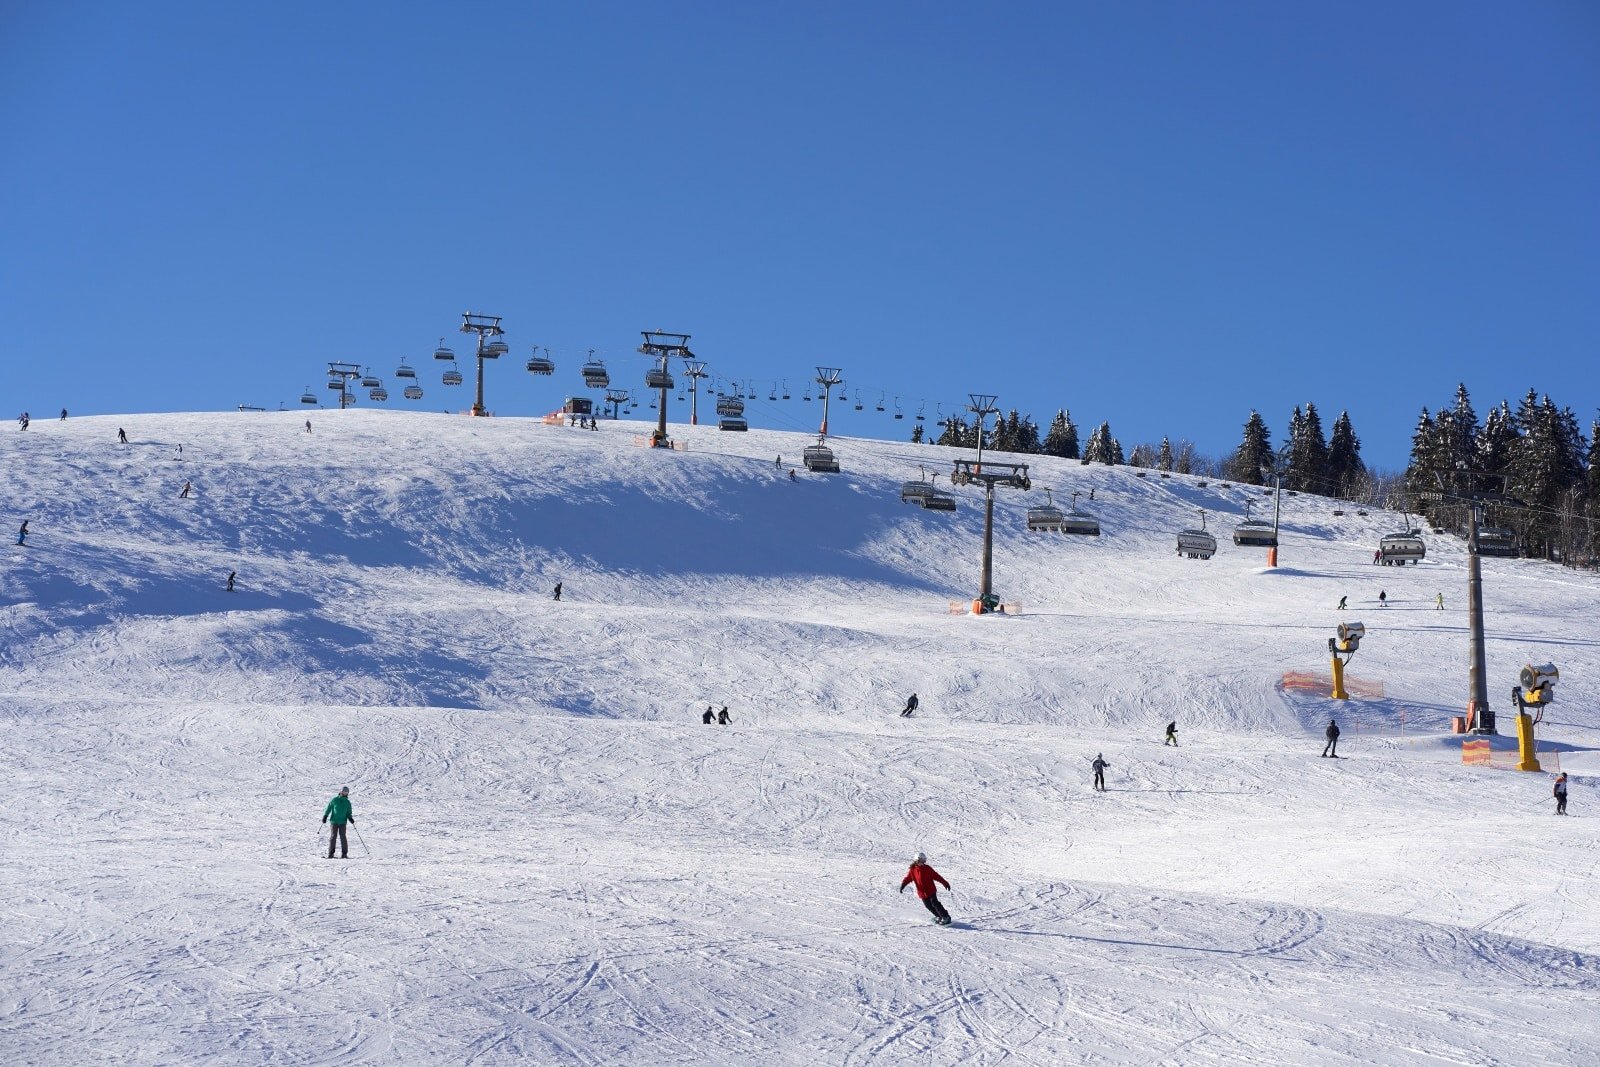 <p><span>Feldberg, the highest peak in the Black Forest, is a paradise for outdoor enthusiasts. In winter, it transforms into a popular ski destination, with slopes catering to all levels of skiers and snowboarders. The mountain also offers opportunities for snowshoeing and cross-country skiing.</span></p> <p><span>In summer, Feldberg’s lush meadows and clear skies make it perfect for hiking, mountain biking, and paragliding. The Feldberg Nature Discovery Park provides informative trails about the local flora and fauna.</span></p> <p><span>From the summit, you can enjoy panoramic views that stretch across the Black Forest and into the Alps on clear days. </span><span>Whether blanketed in snow or basked in sunshine, Feldberg offers a range of activities and breathtaking scenery year-round.</span></p> <p><b>Insider’s Tip: </b><span>For a unique experience, try snowshoeing in winter to explore the mountain’s quieter, snow-covered paths.</span></p> <p><b>How To Get There: </b><span>Feldberg is accessible by car or bus from Freiburg or Titisee.</span></p> <p><b>Best Time To Travel: </b><span>Winter is for skiing and snowboarding, and summer is for hiking and nature walks.</span></p>